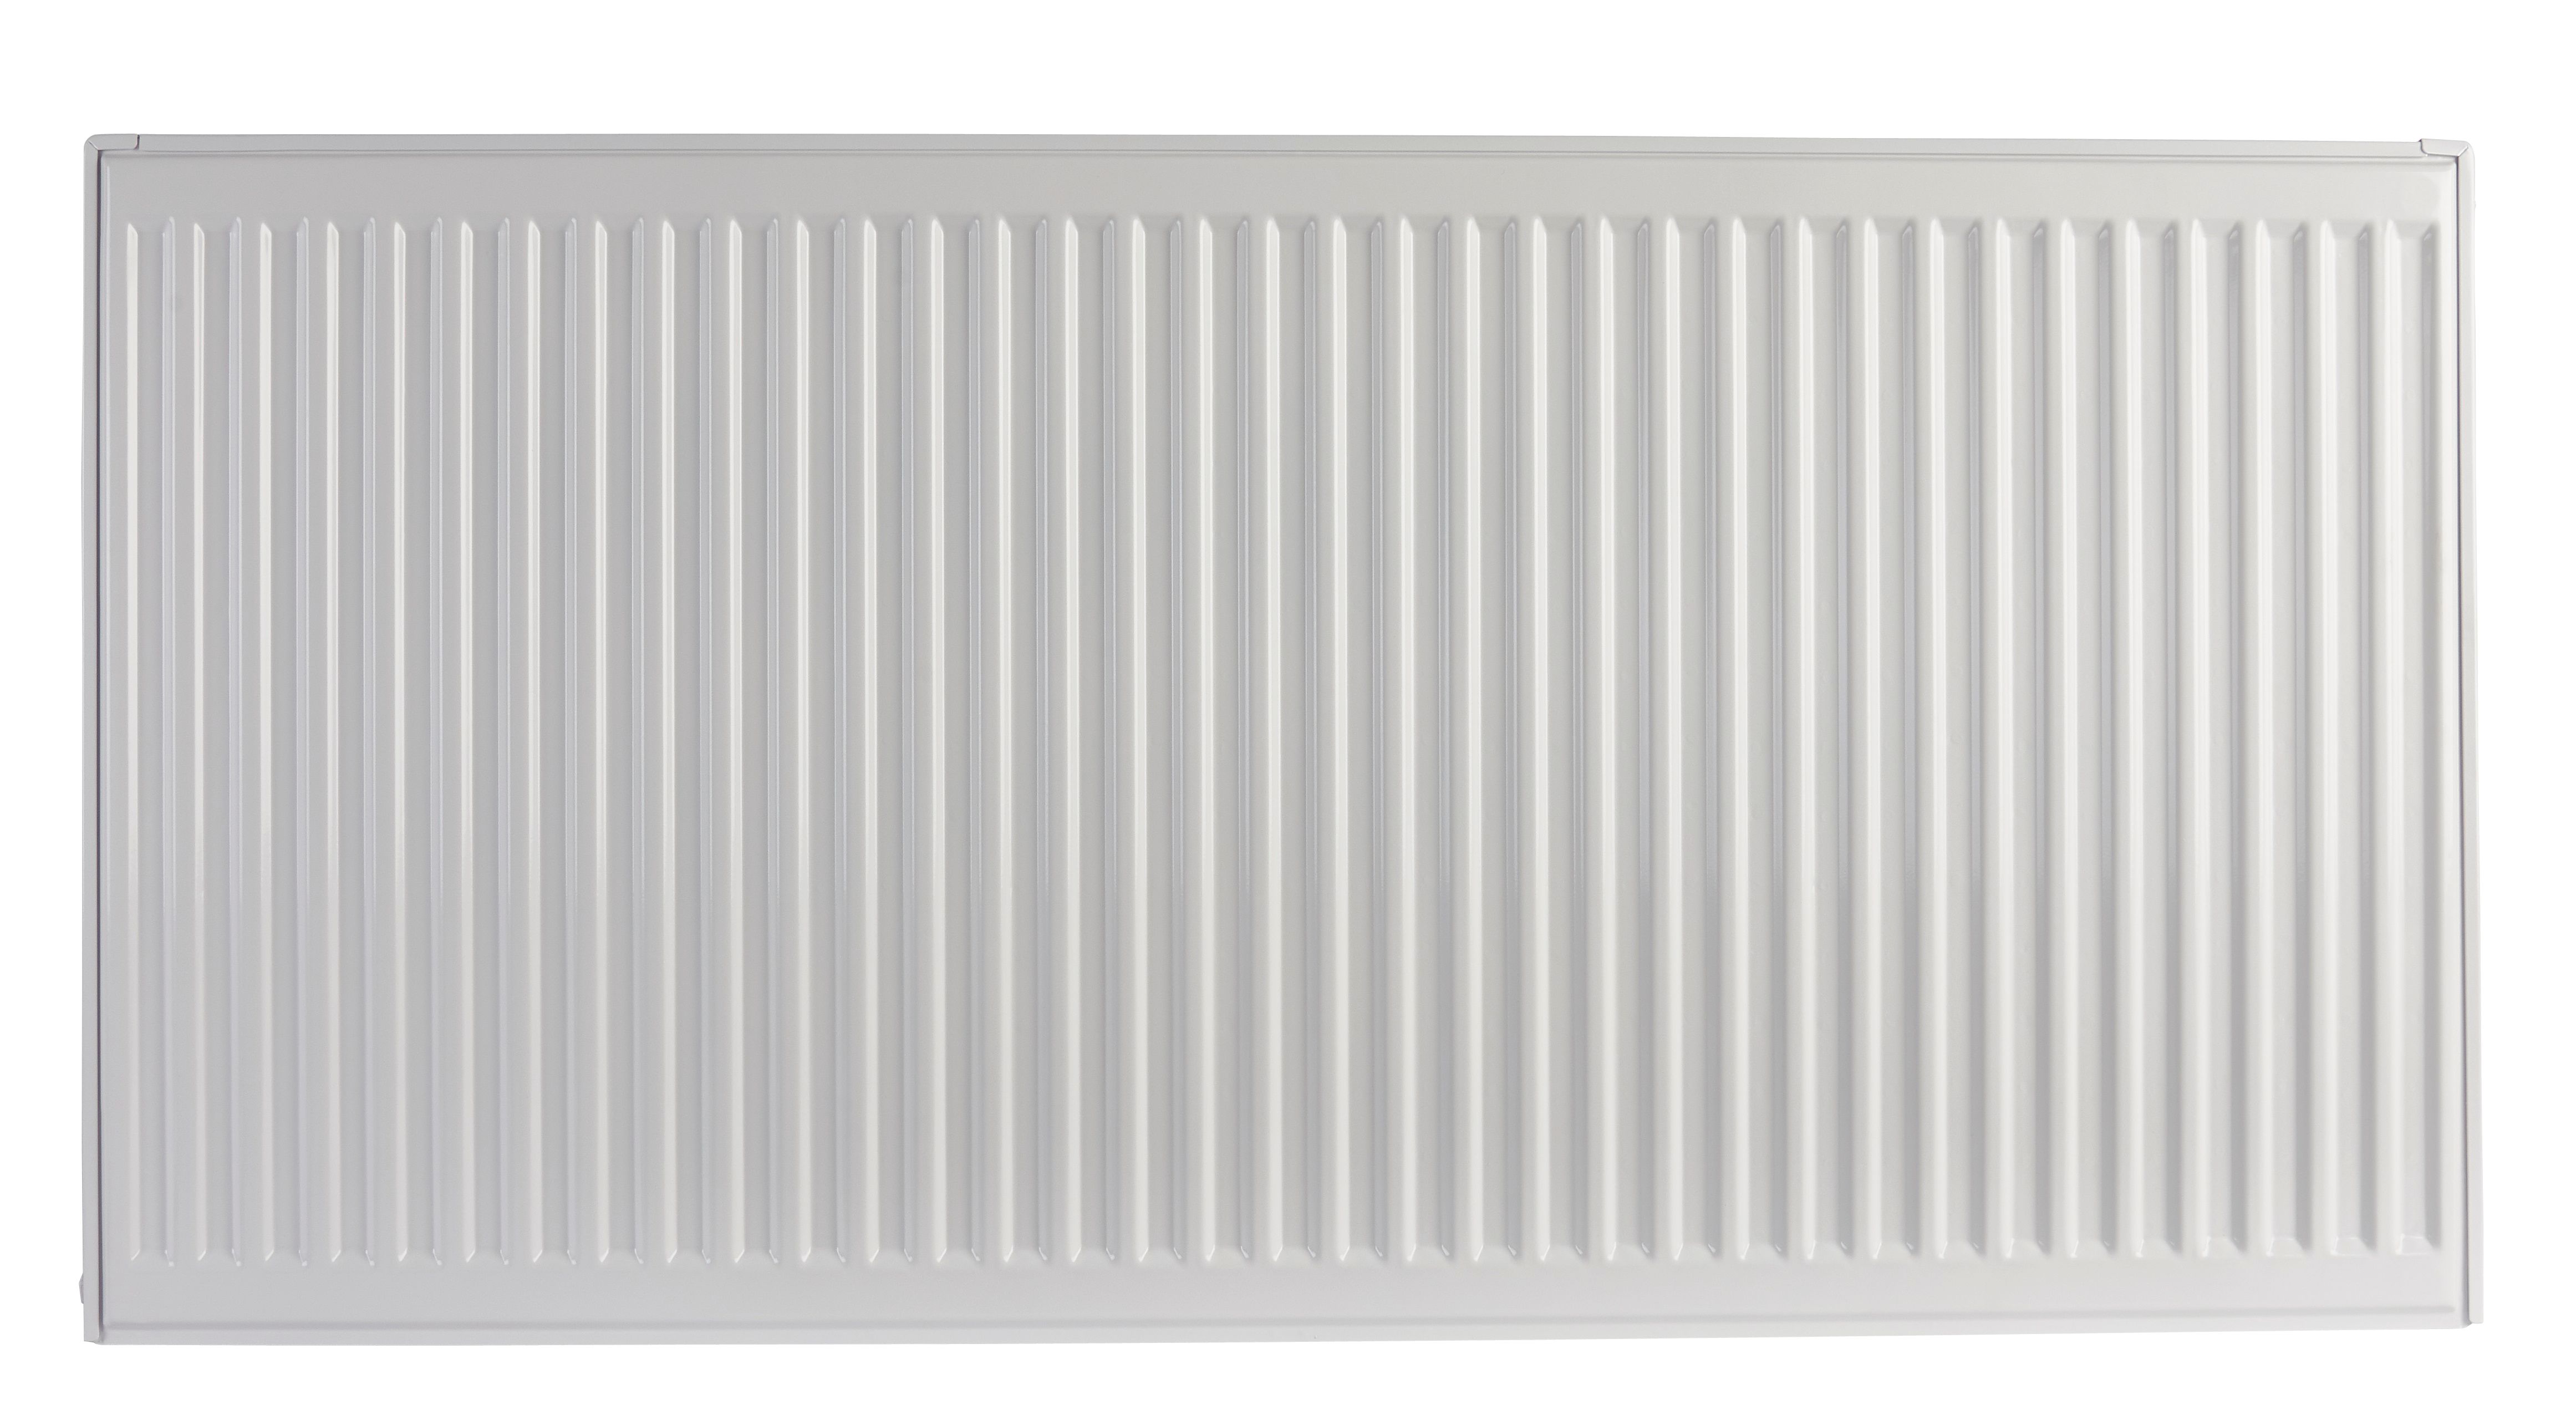 Image of Homeline by Stelrad 600 x 700mm Type 11 Single Panel Single Convector Radiator